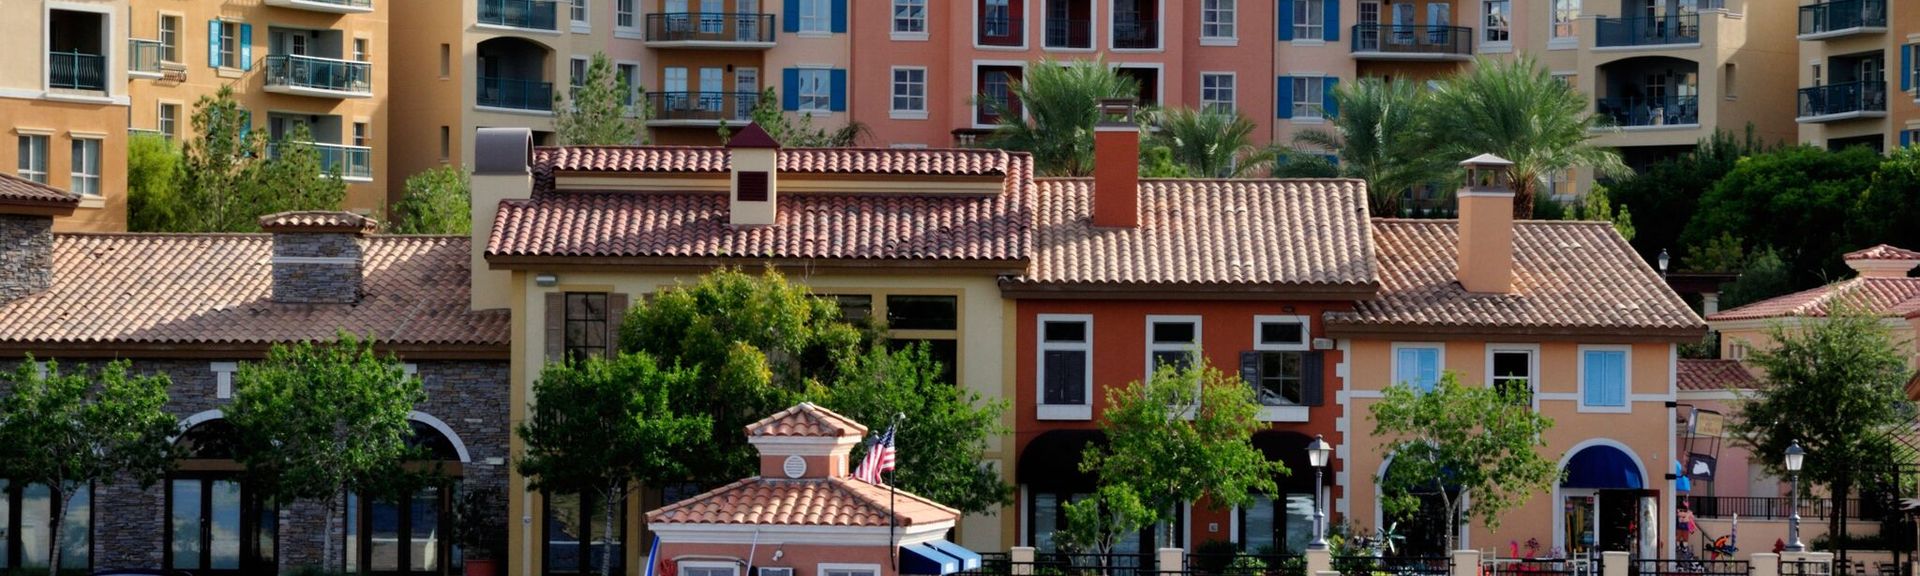 Top 20 Best Henderson Nv Vacation Rentals House Rentals More